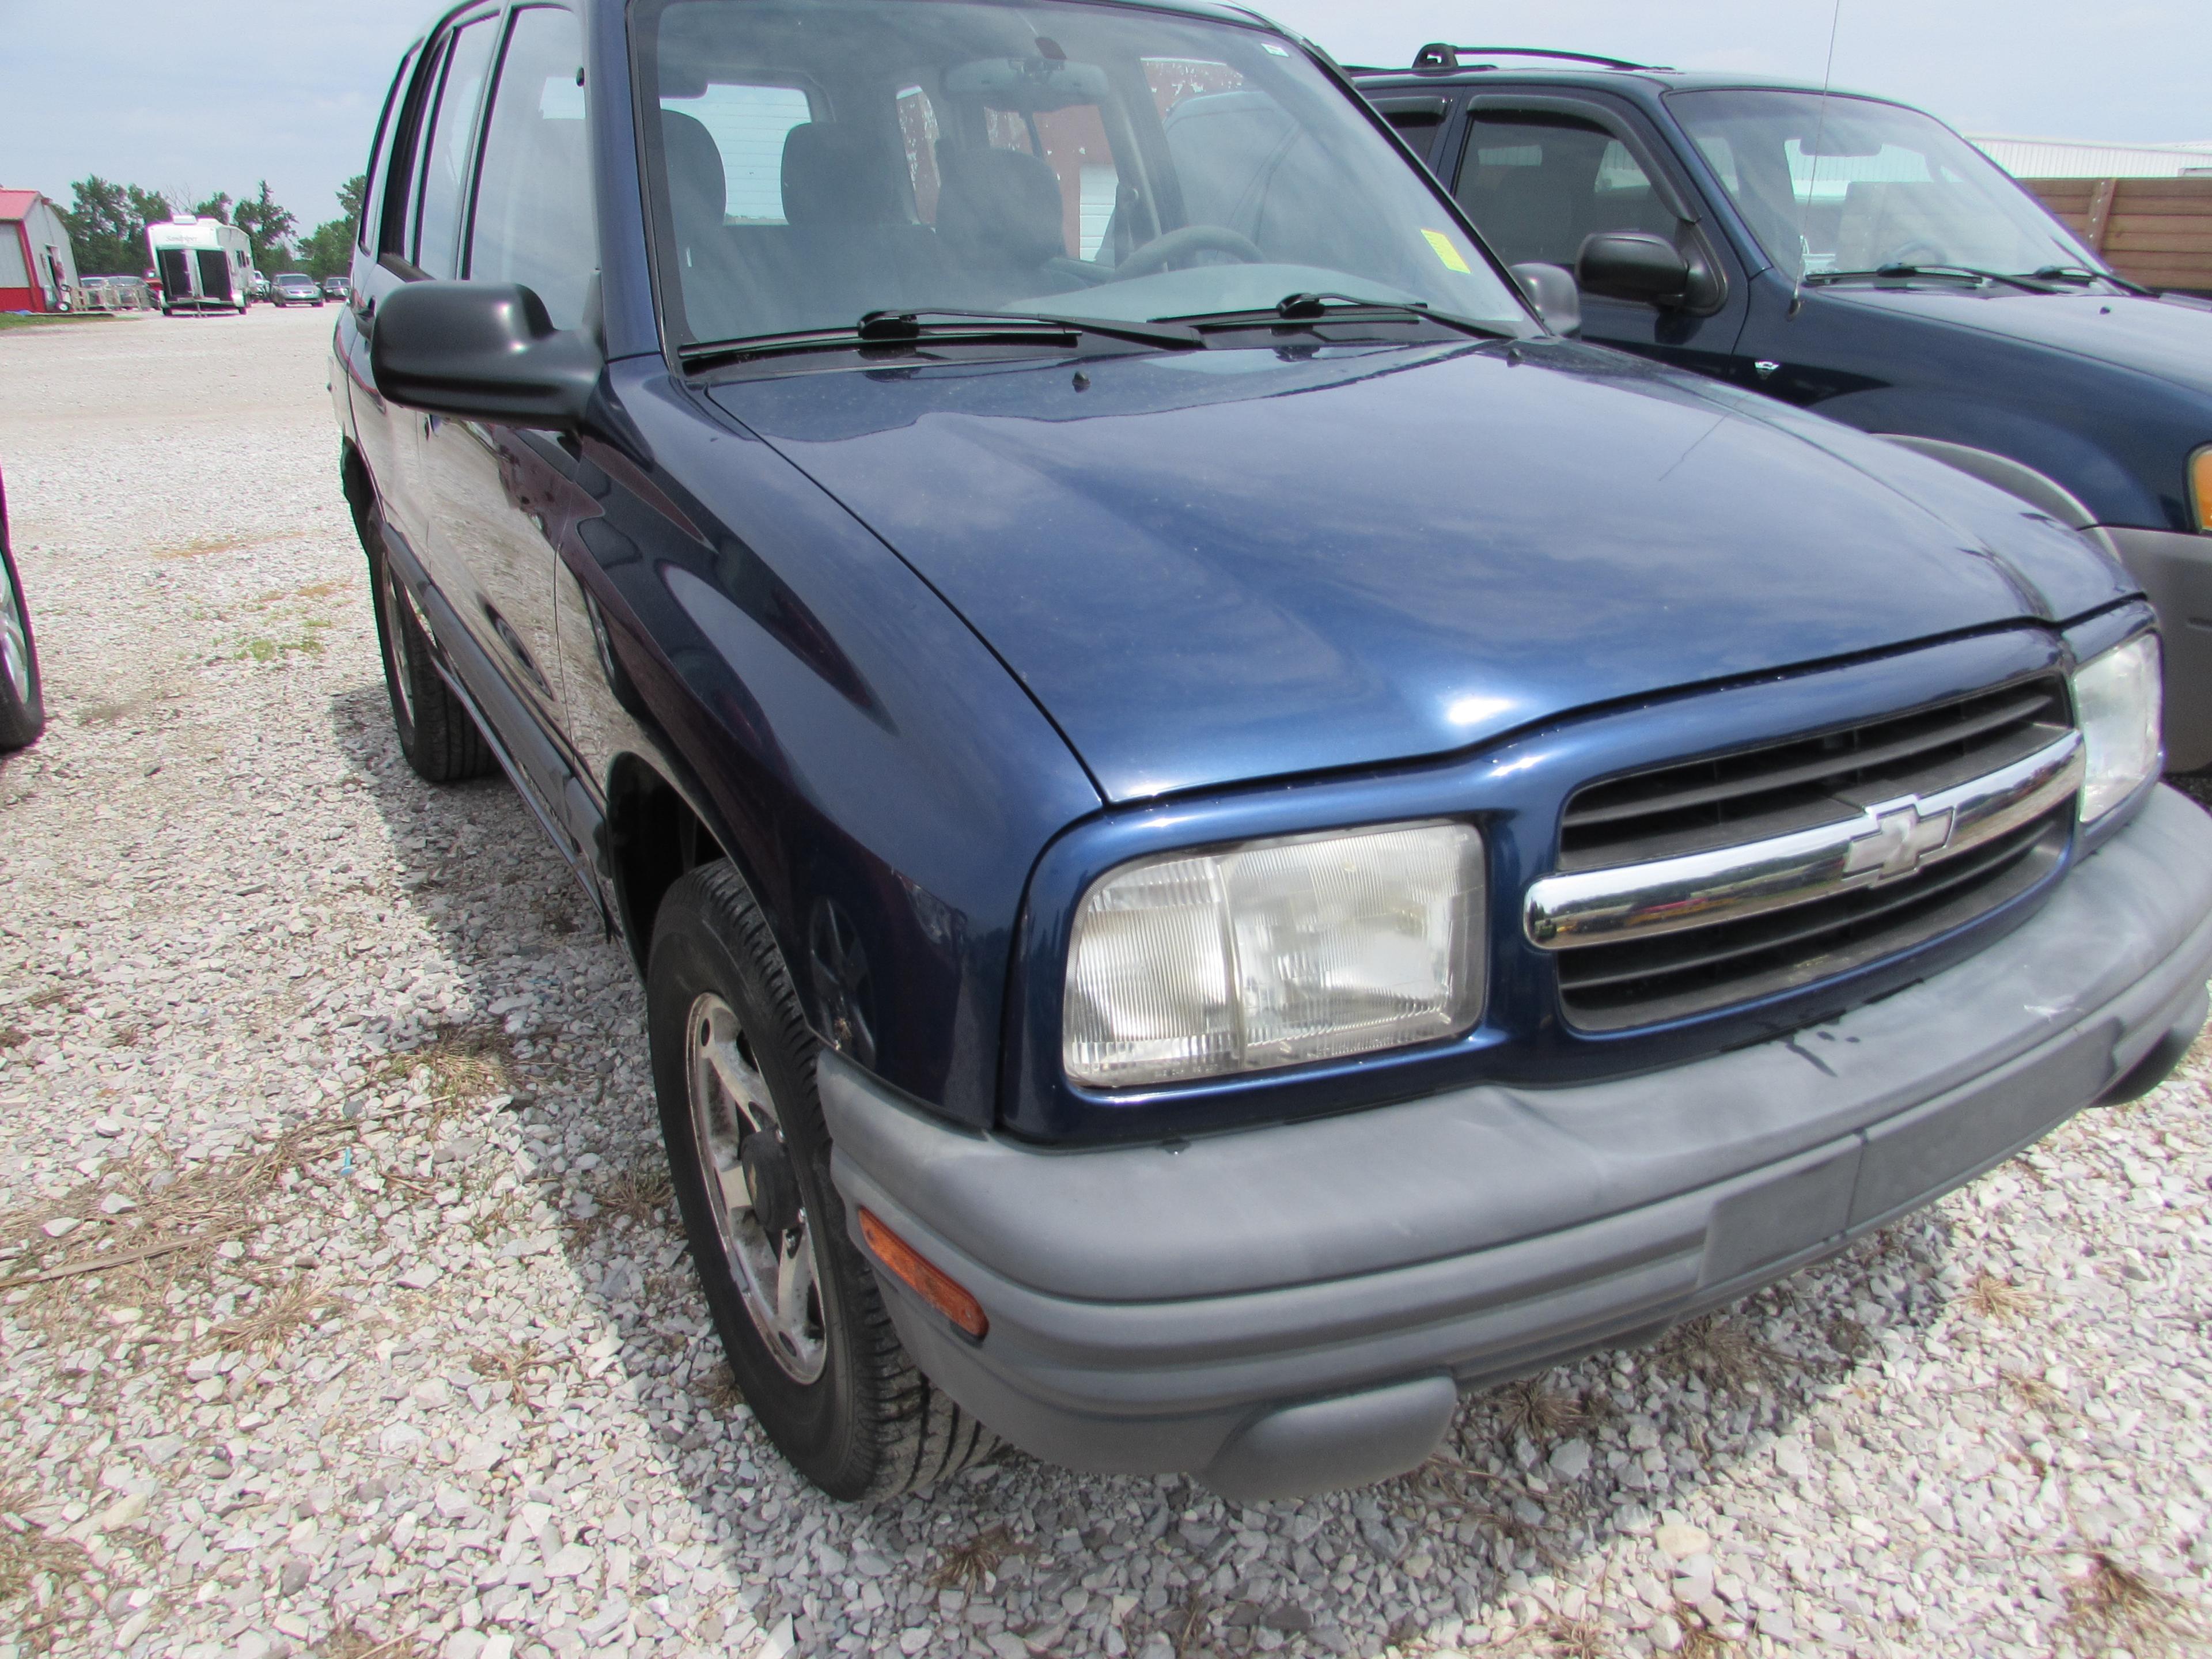 2000 Chevy Tracker Miles: 119,004